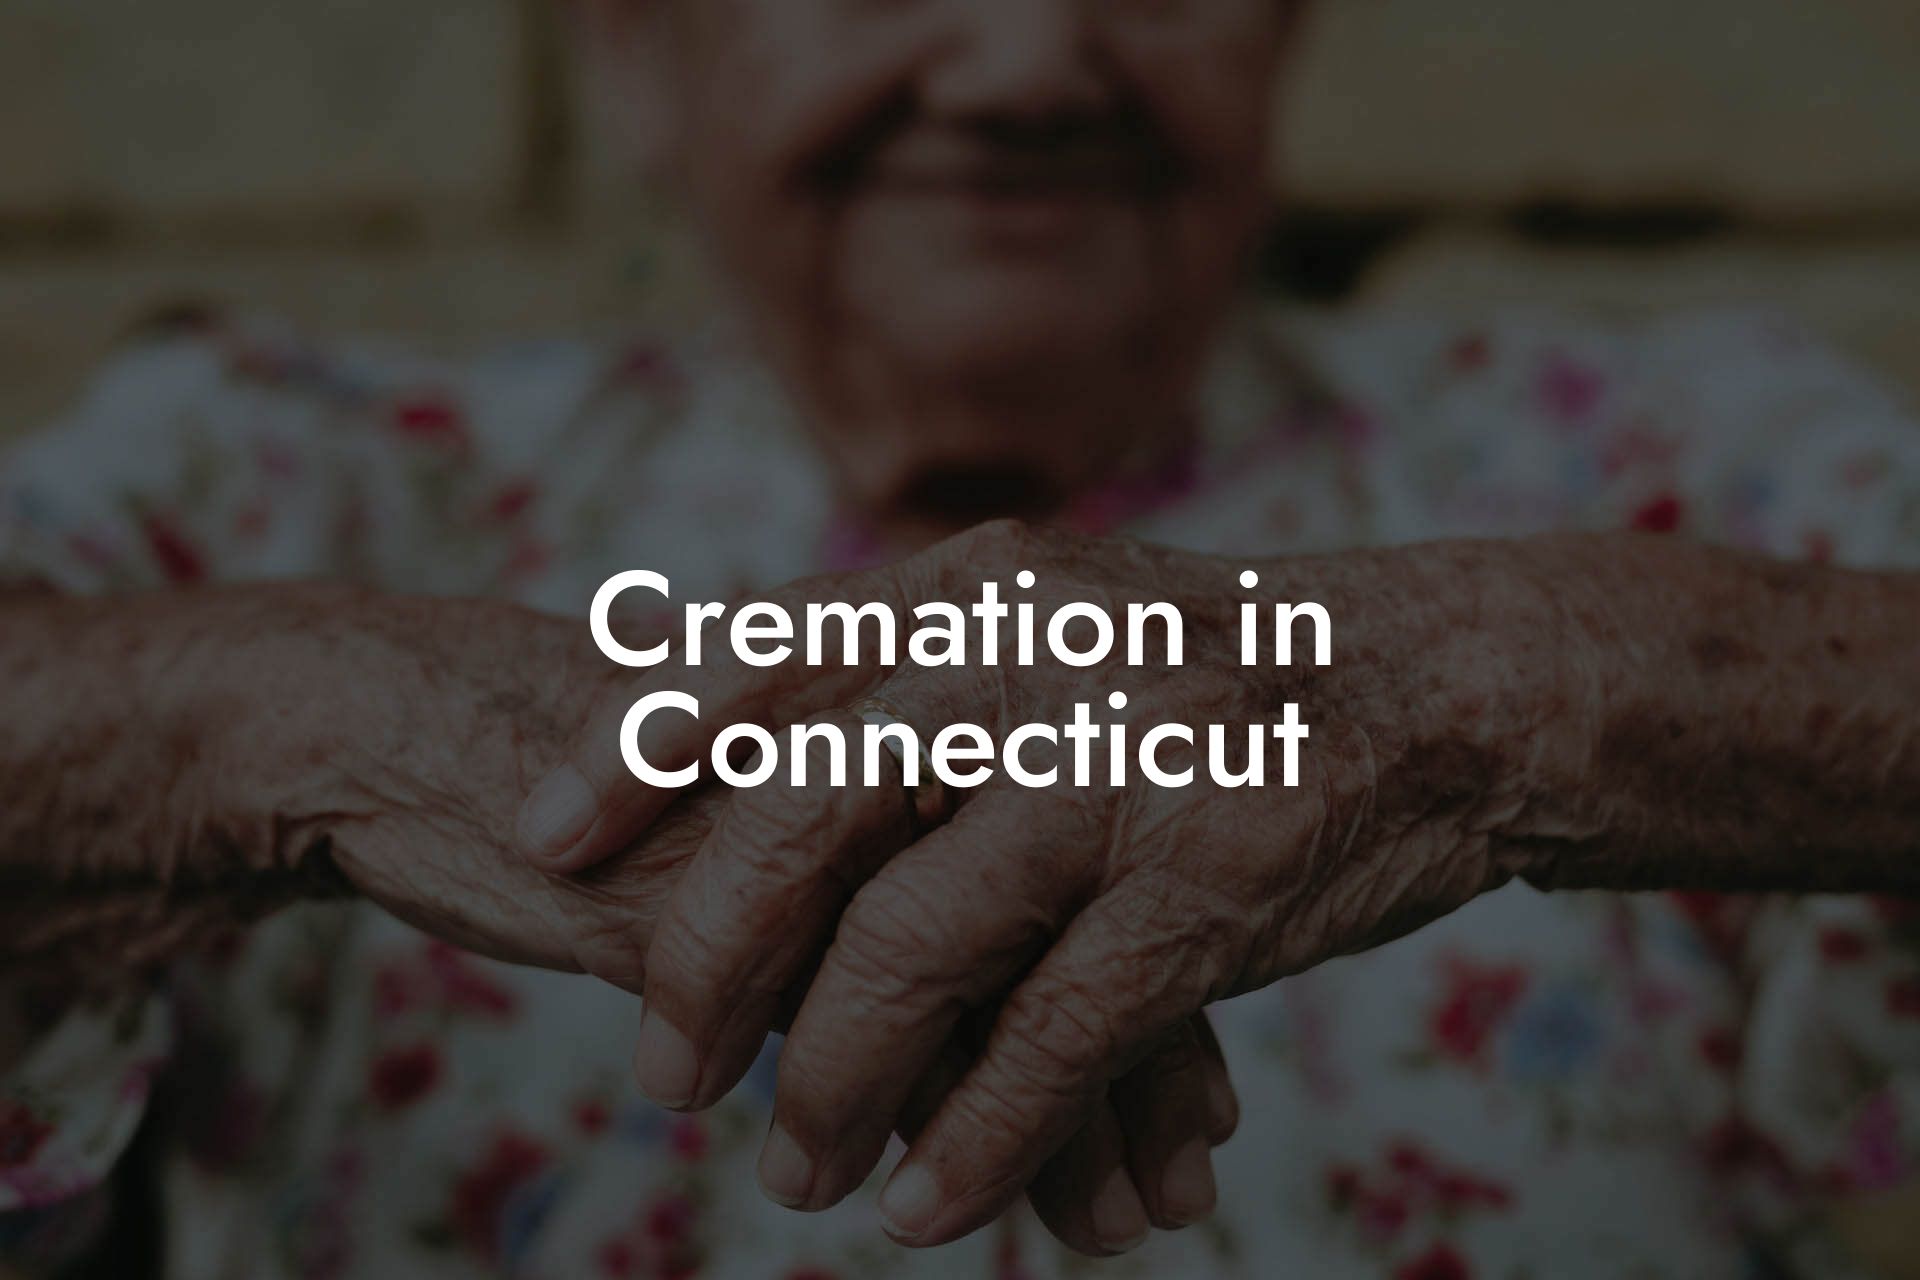 Cremation in Connecticut